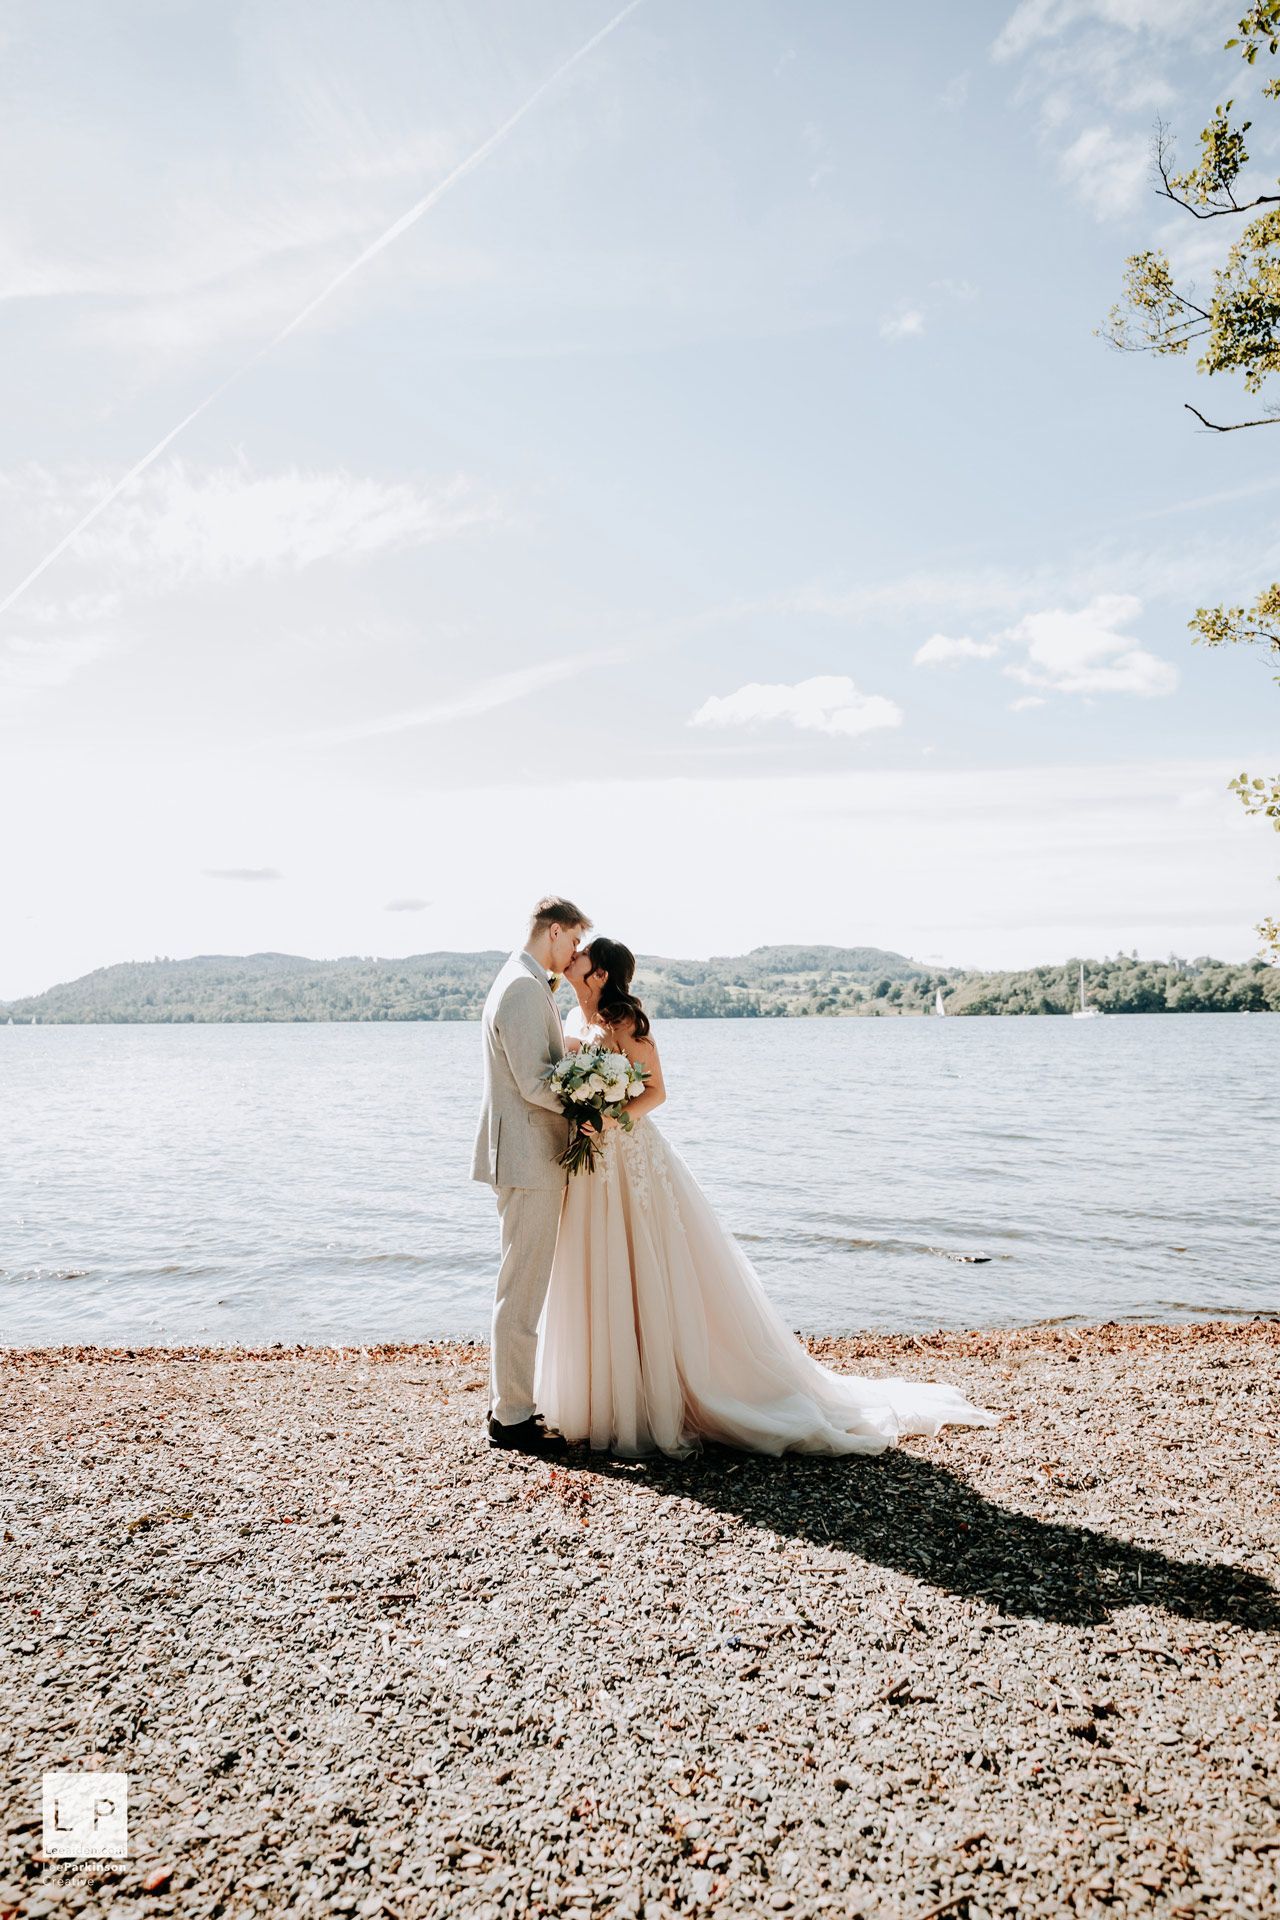 Lake District Wedding Photography by Lee Parkinson Photographer Windermere Ambleside